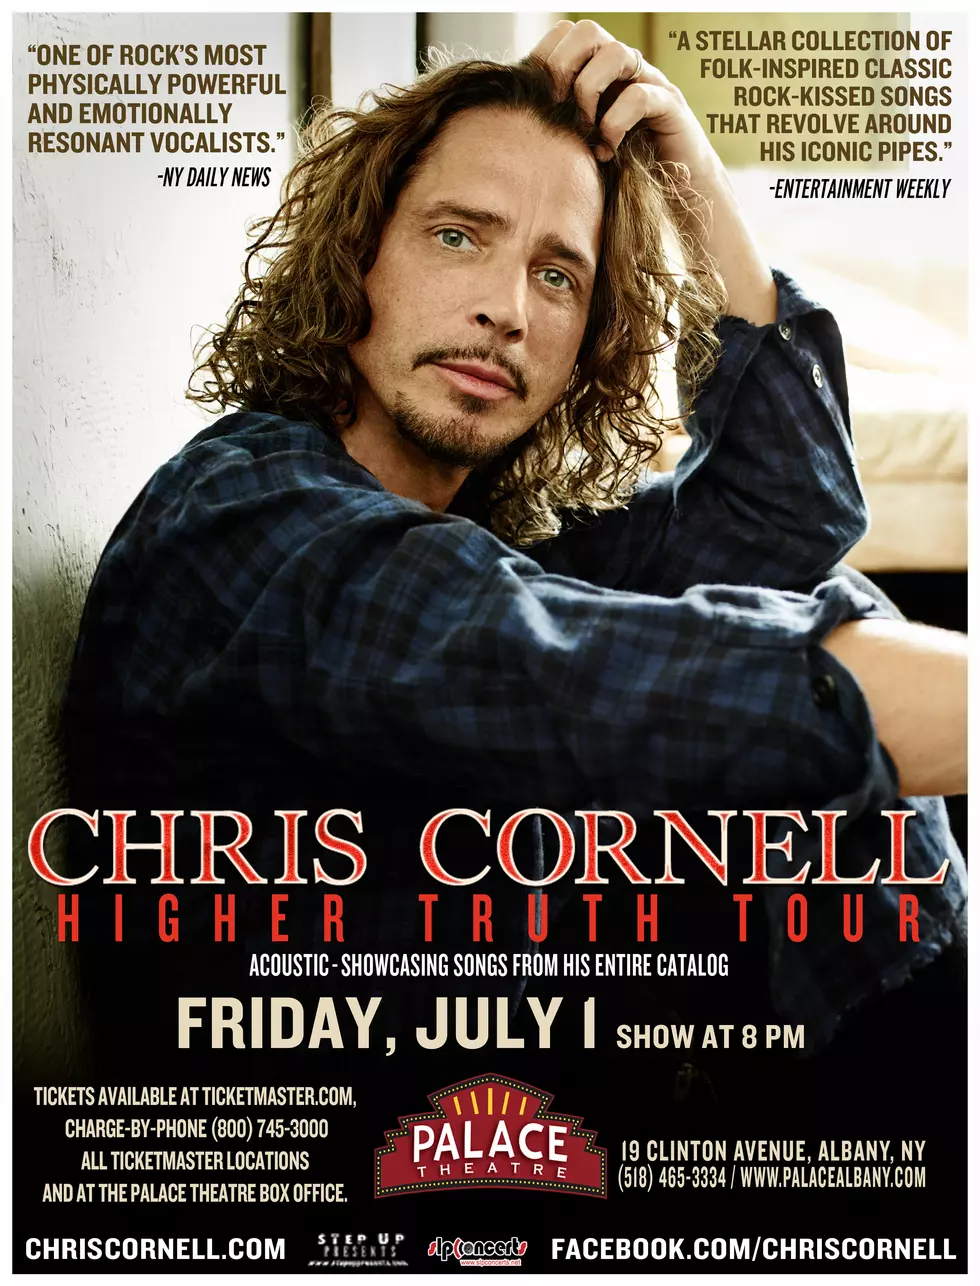 We Have Chris Cornell Tickets For You